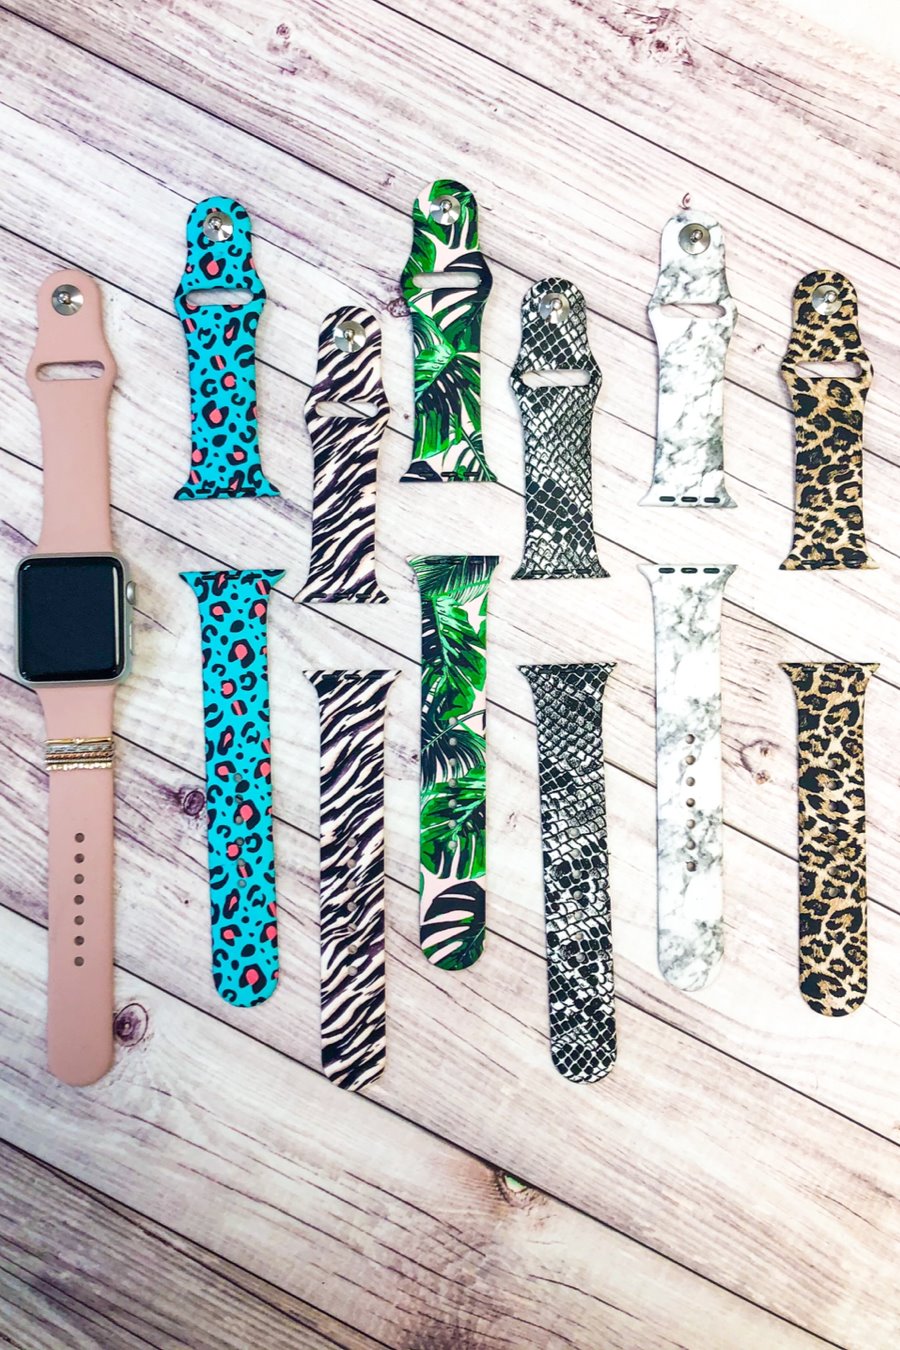 Silicone Apple Watch Bands - Jess Lea Boutique